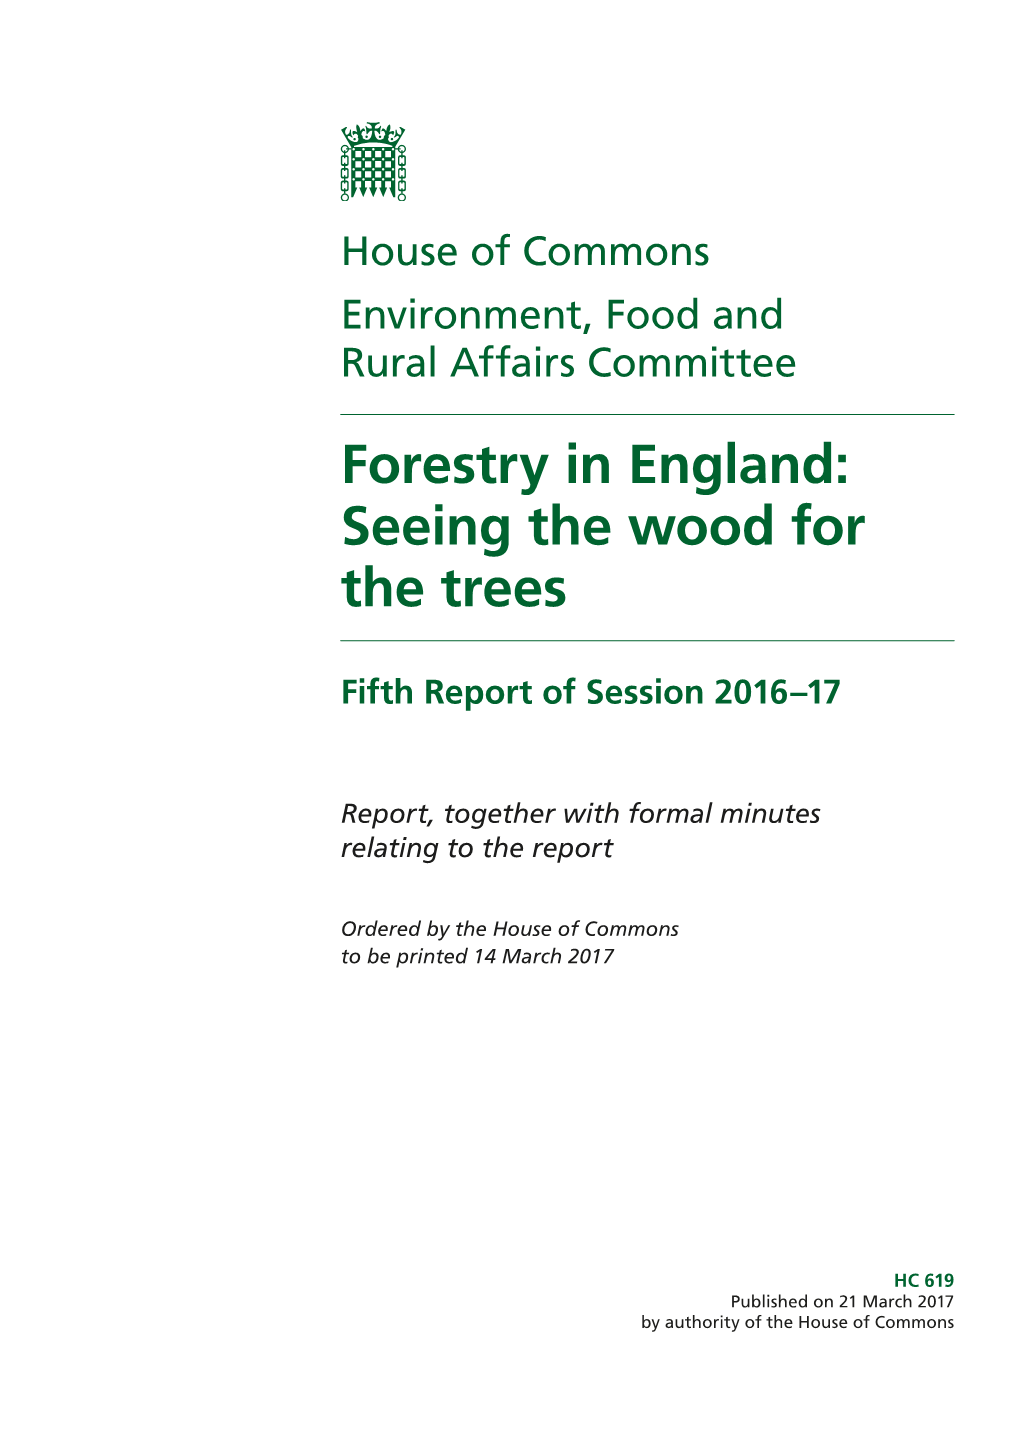 Forestry in England: Seeing the Wood for the Trees